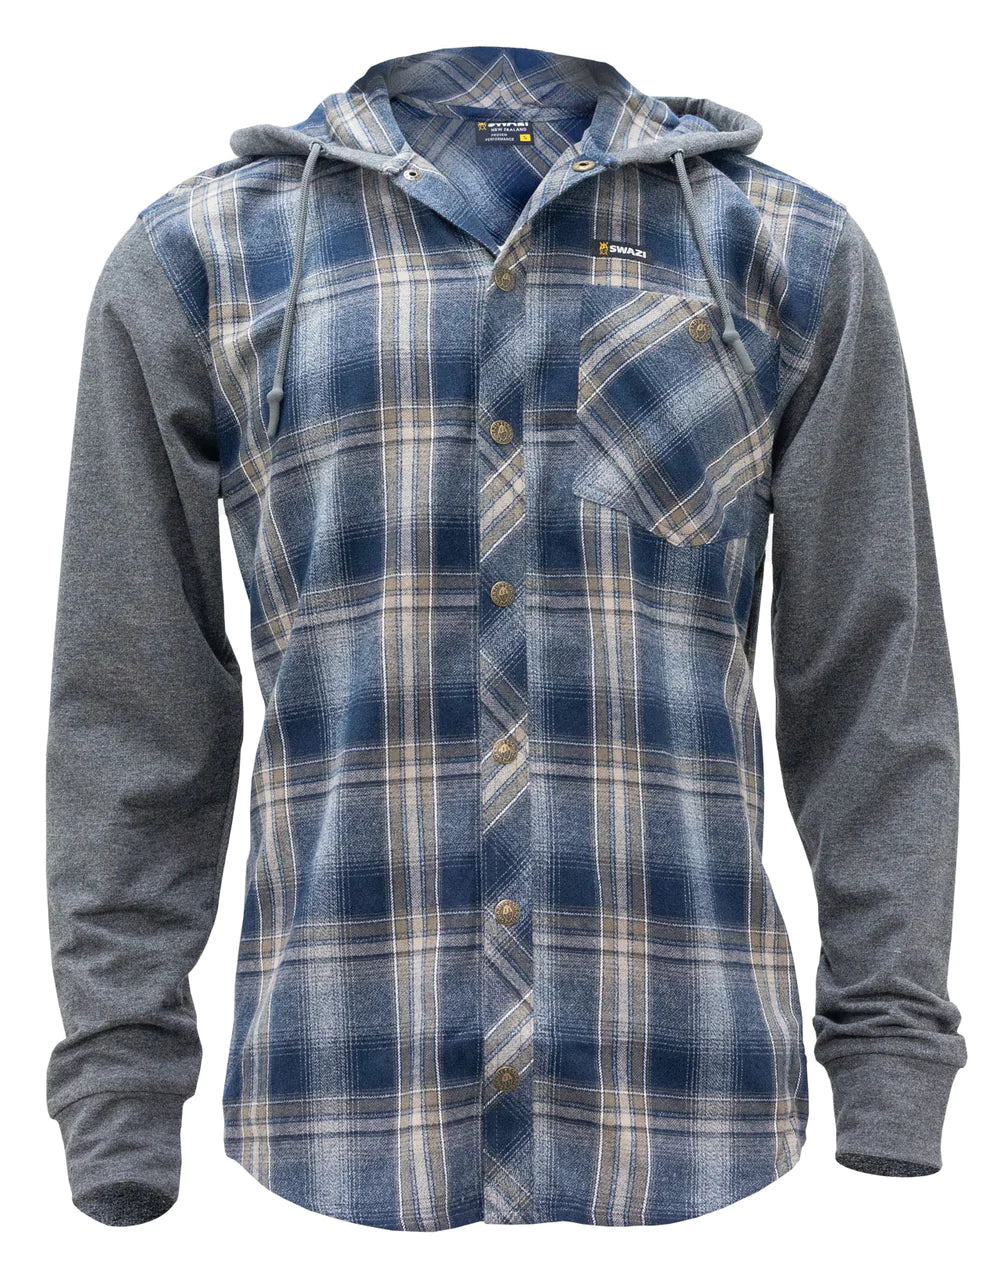 Swazi Apprentice Hooded Shirt -  - Mansfield Hunting & Fishing - Products to prepare for Corona Virus